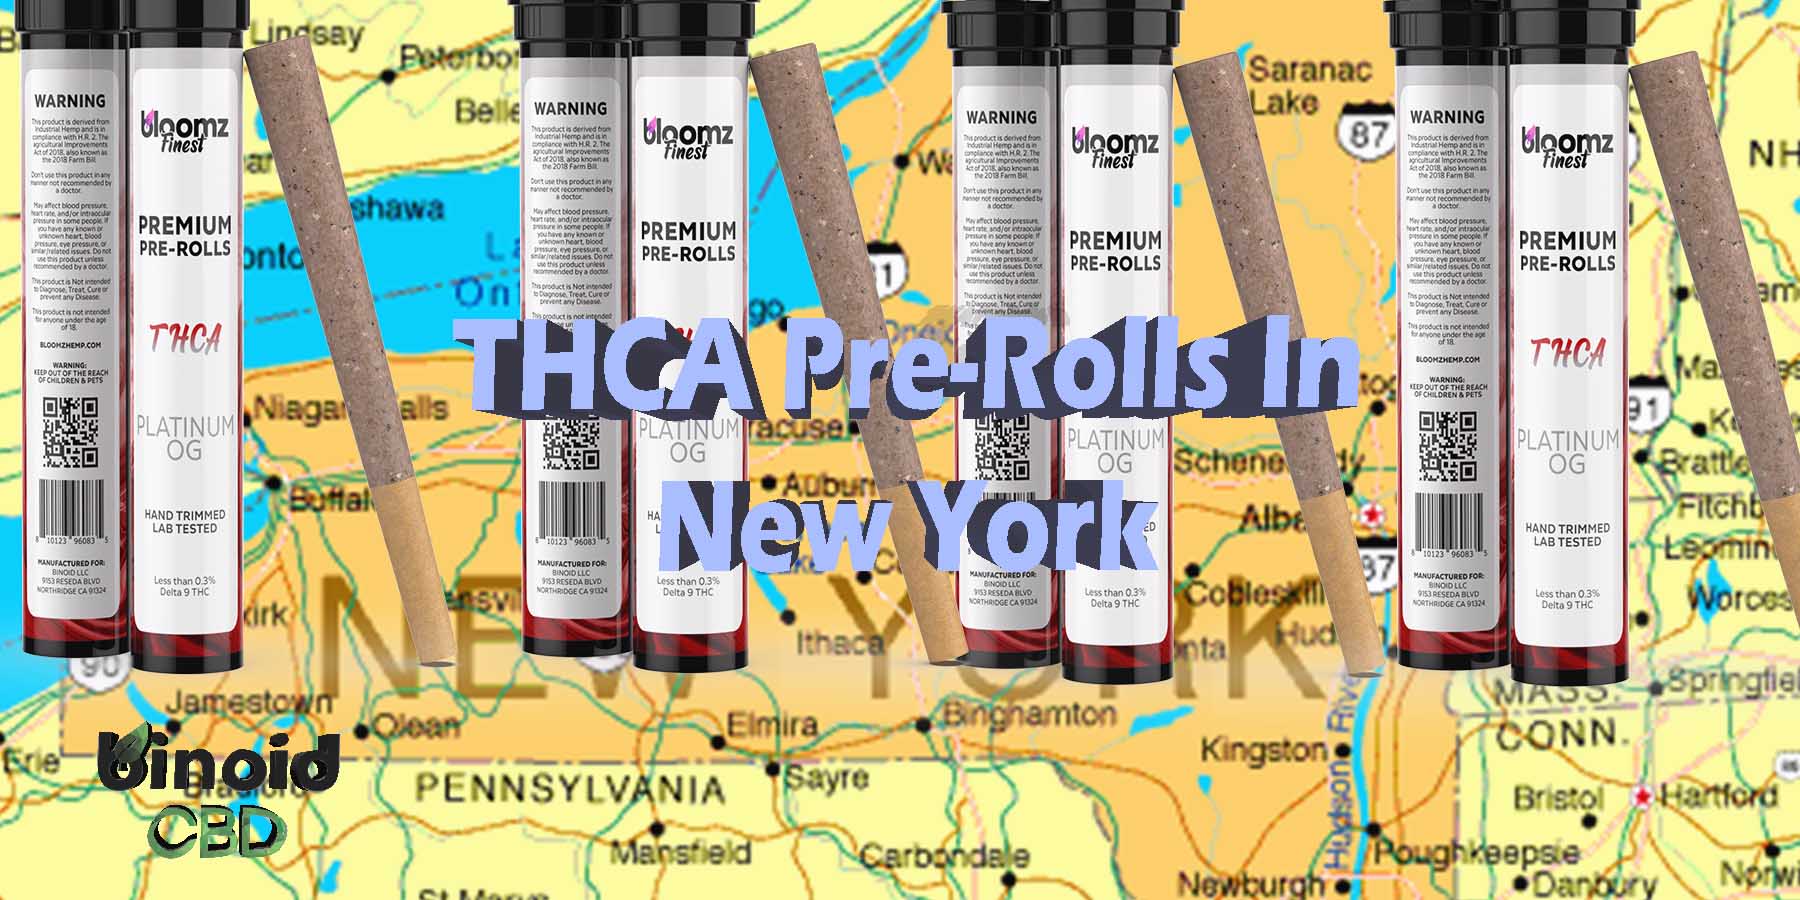 THCA Pre-Rolls In New York THCA Hemp Flower Indica Where To Get Near Me Best Place Lowest Price Coupon Discount Strongest Brand Bloomz